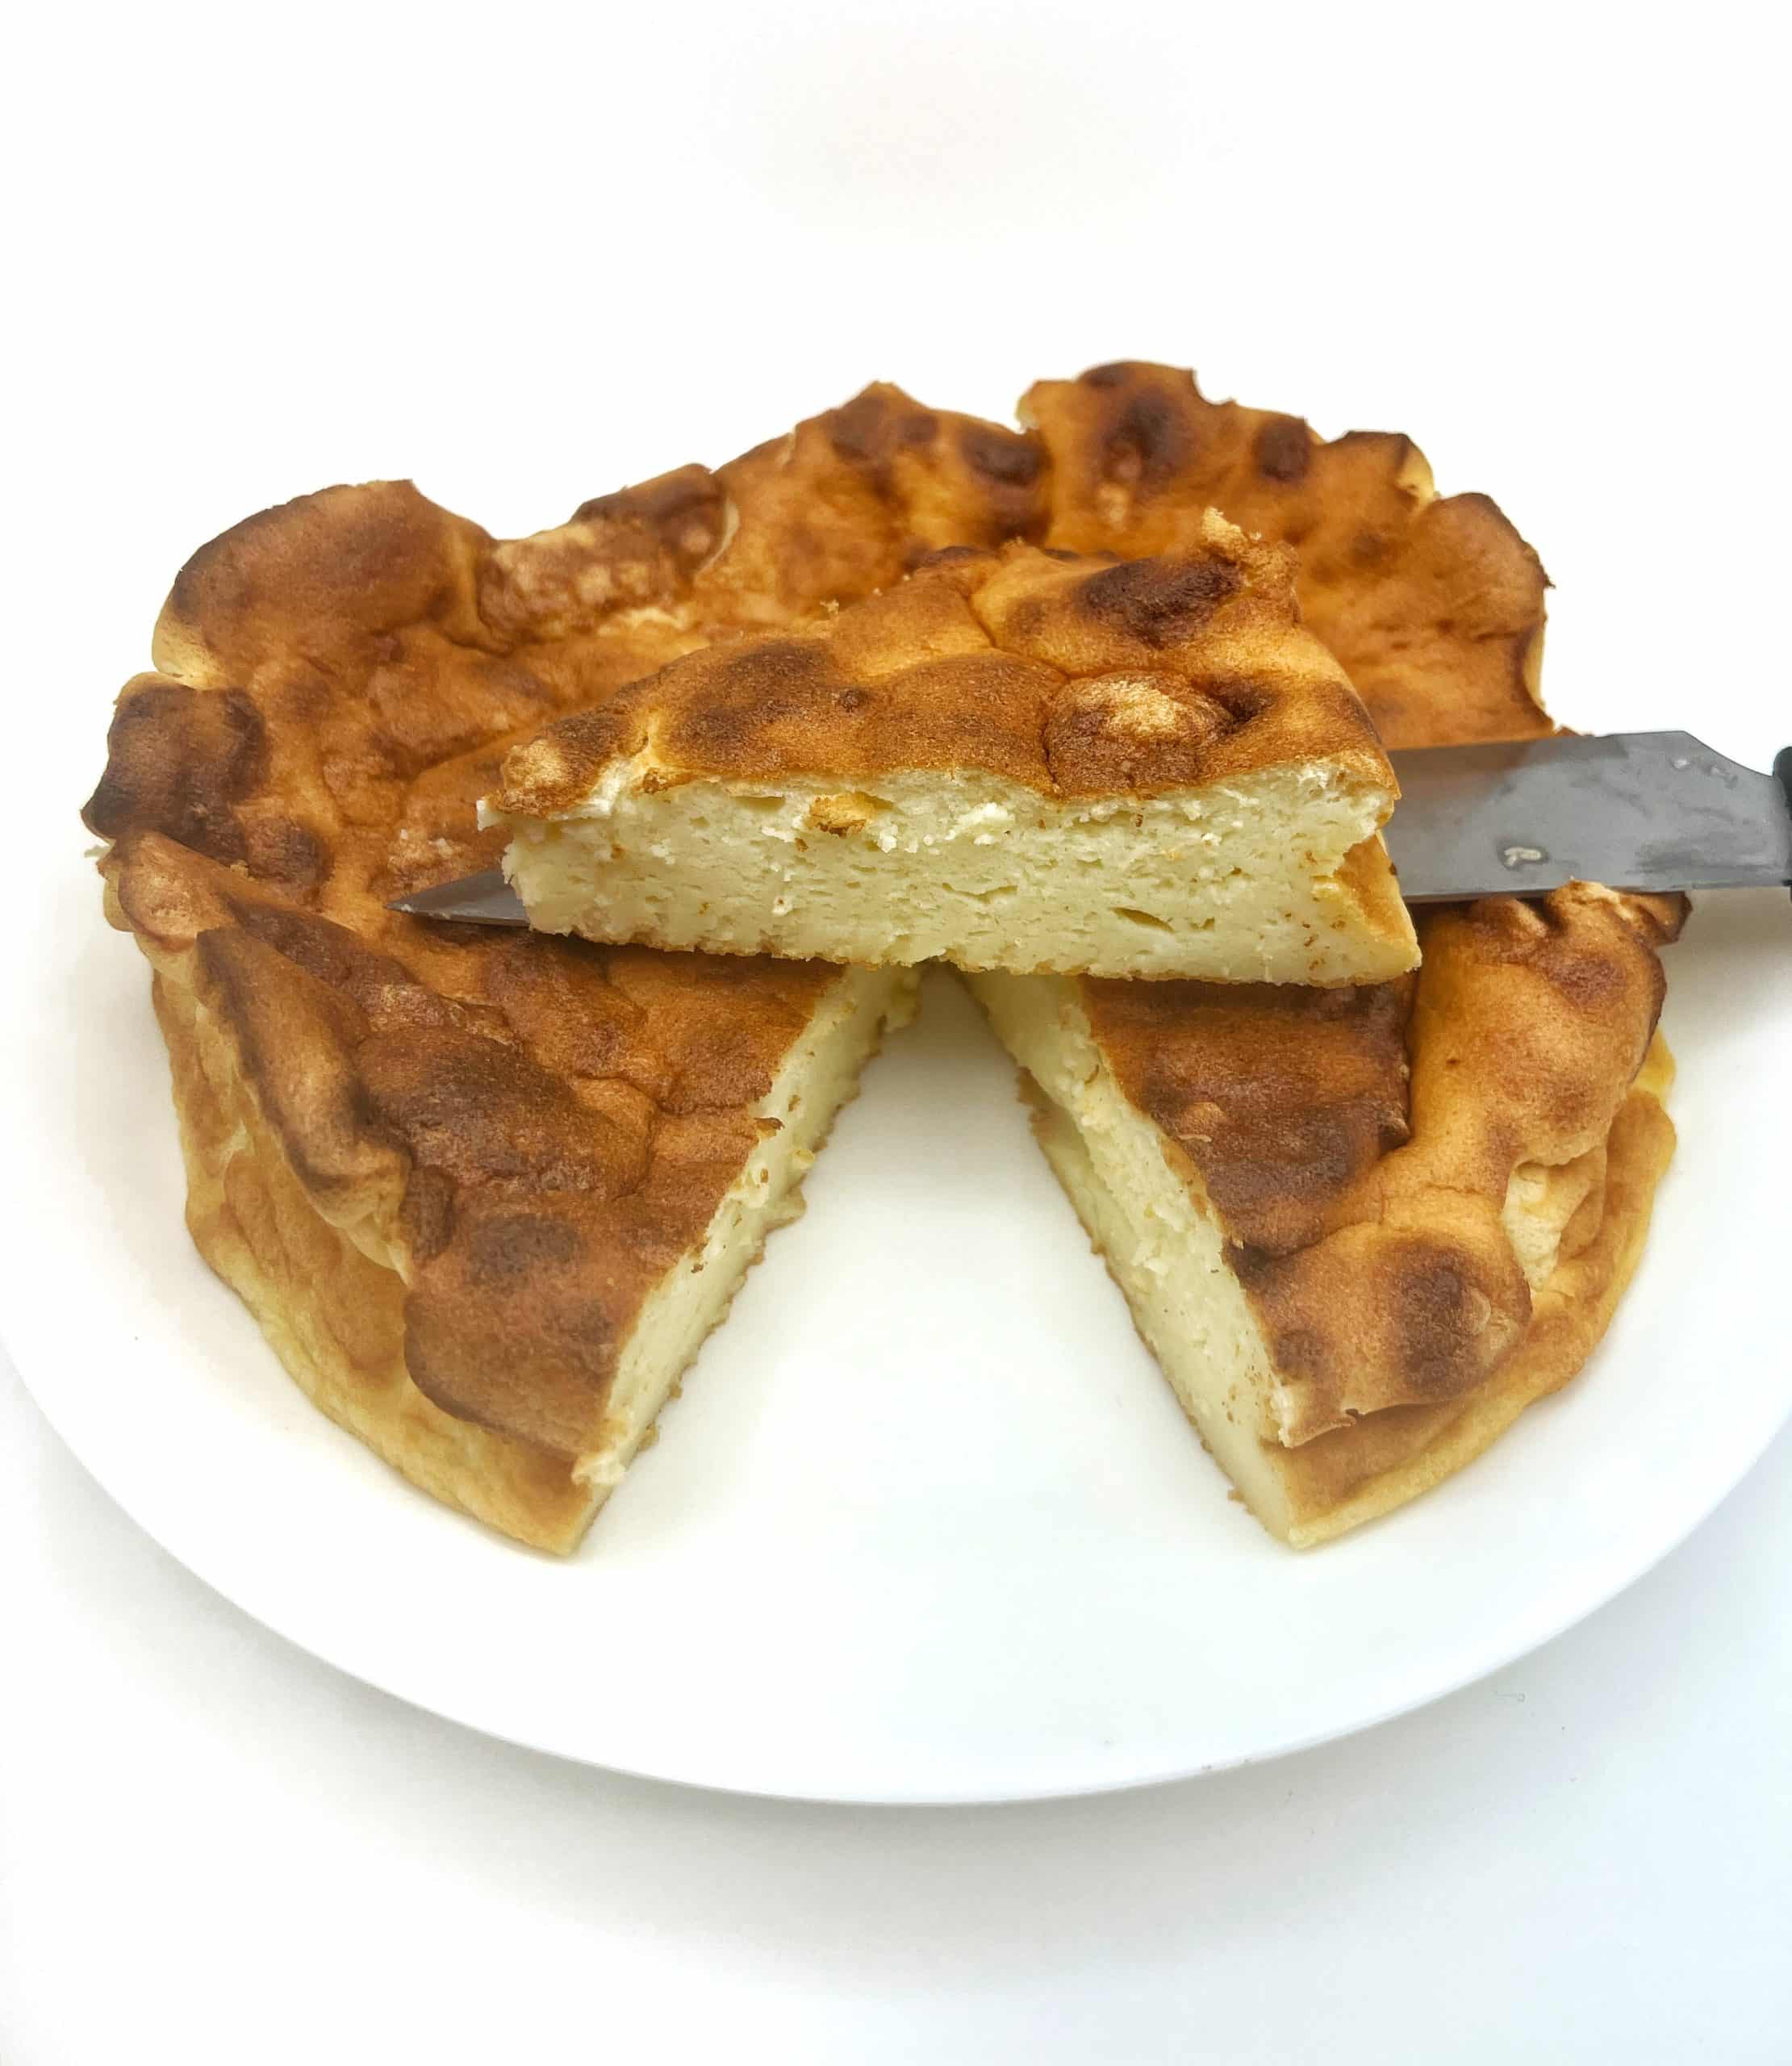 Gâteau au fromage blanc 0% inratable